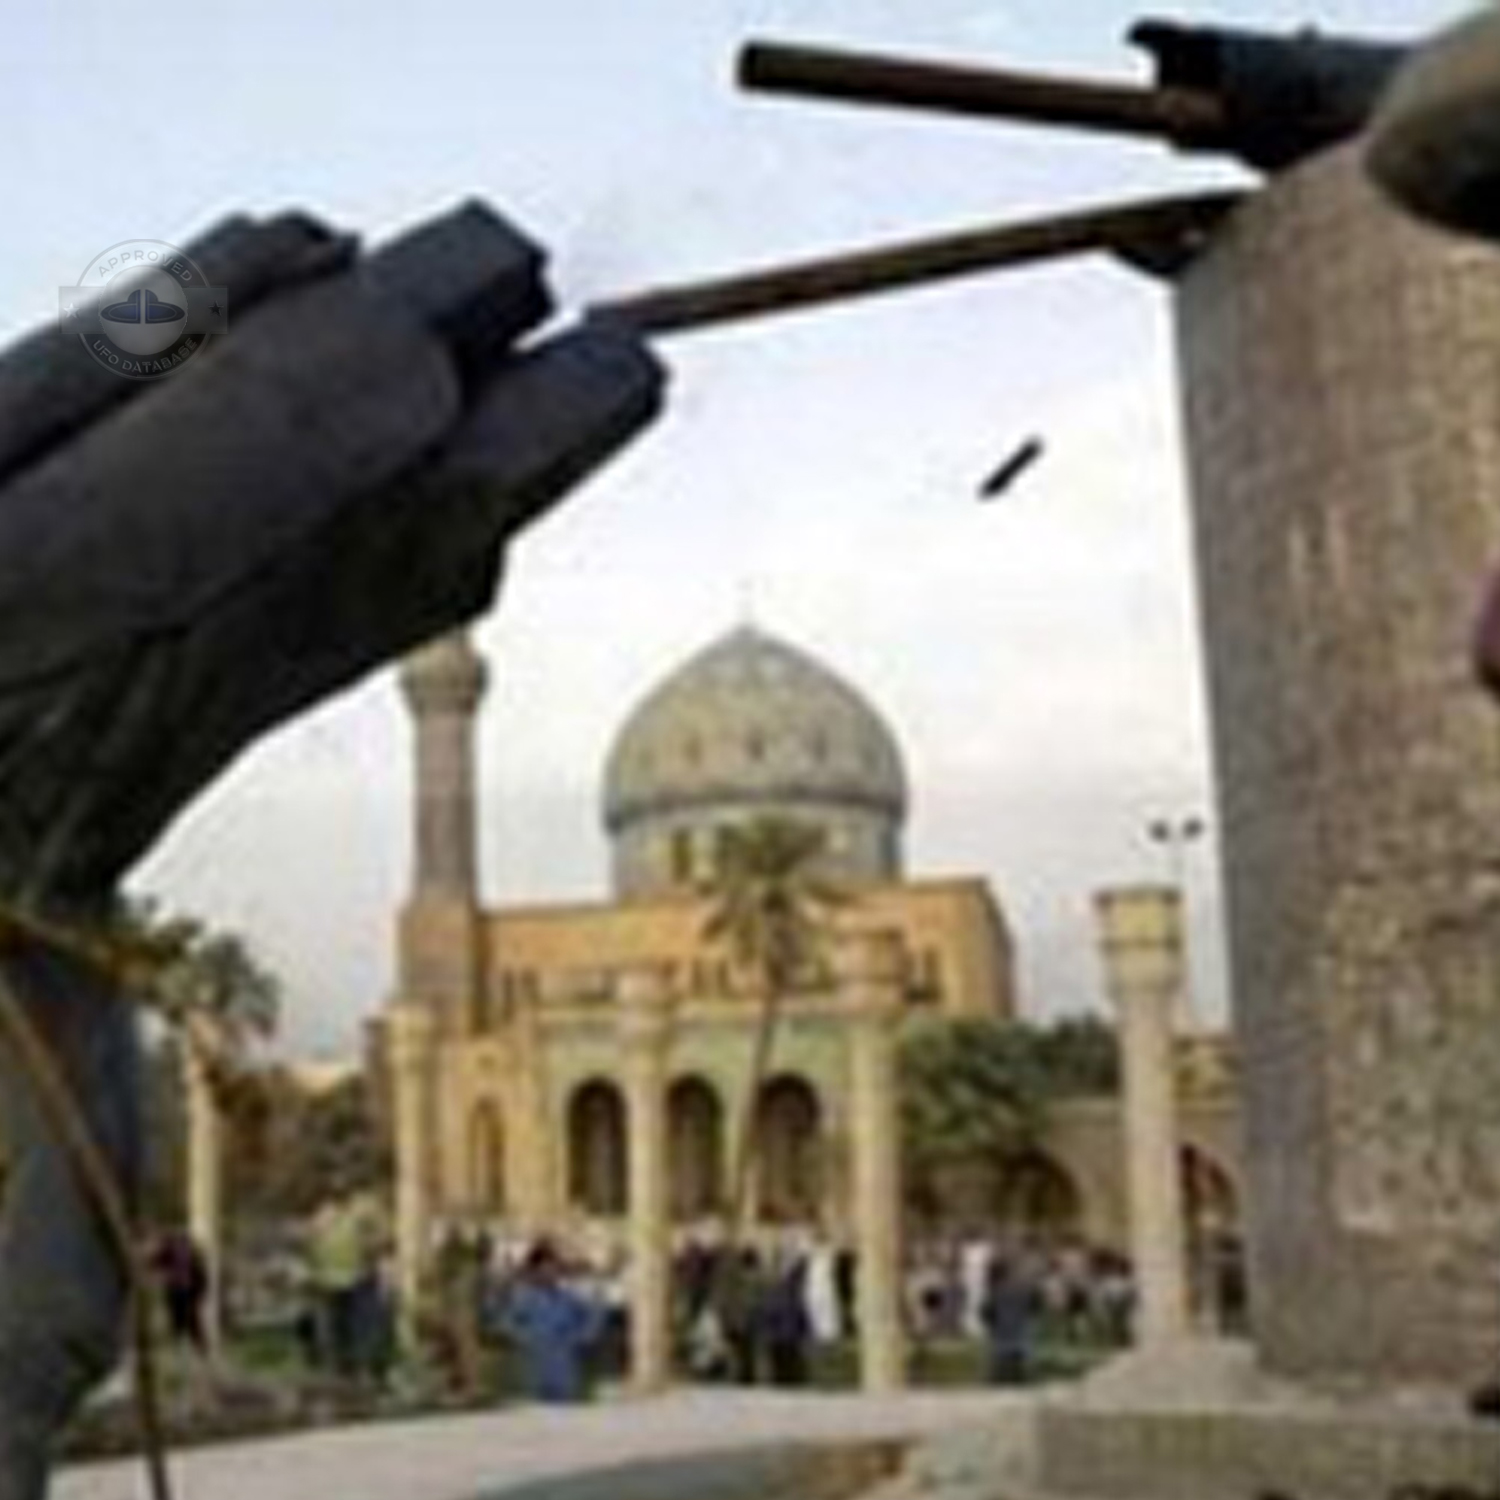 UFO Picture taken while Saddam Hussein statue is falling | Baghdad UFO Picture #183-2